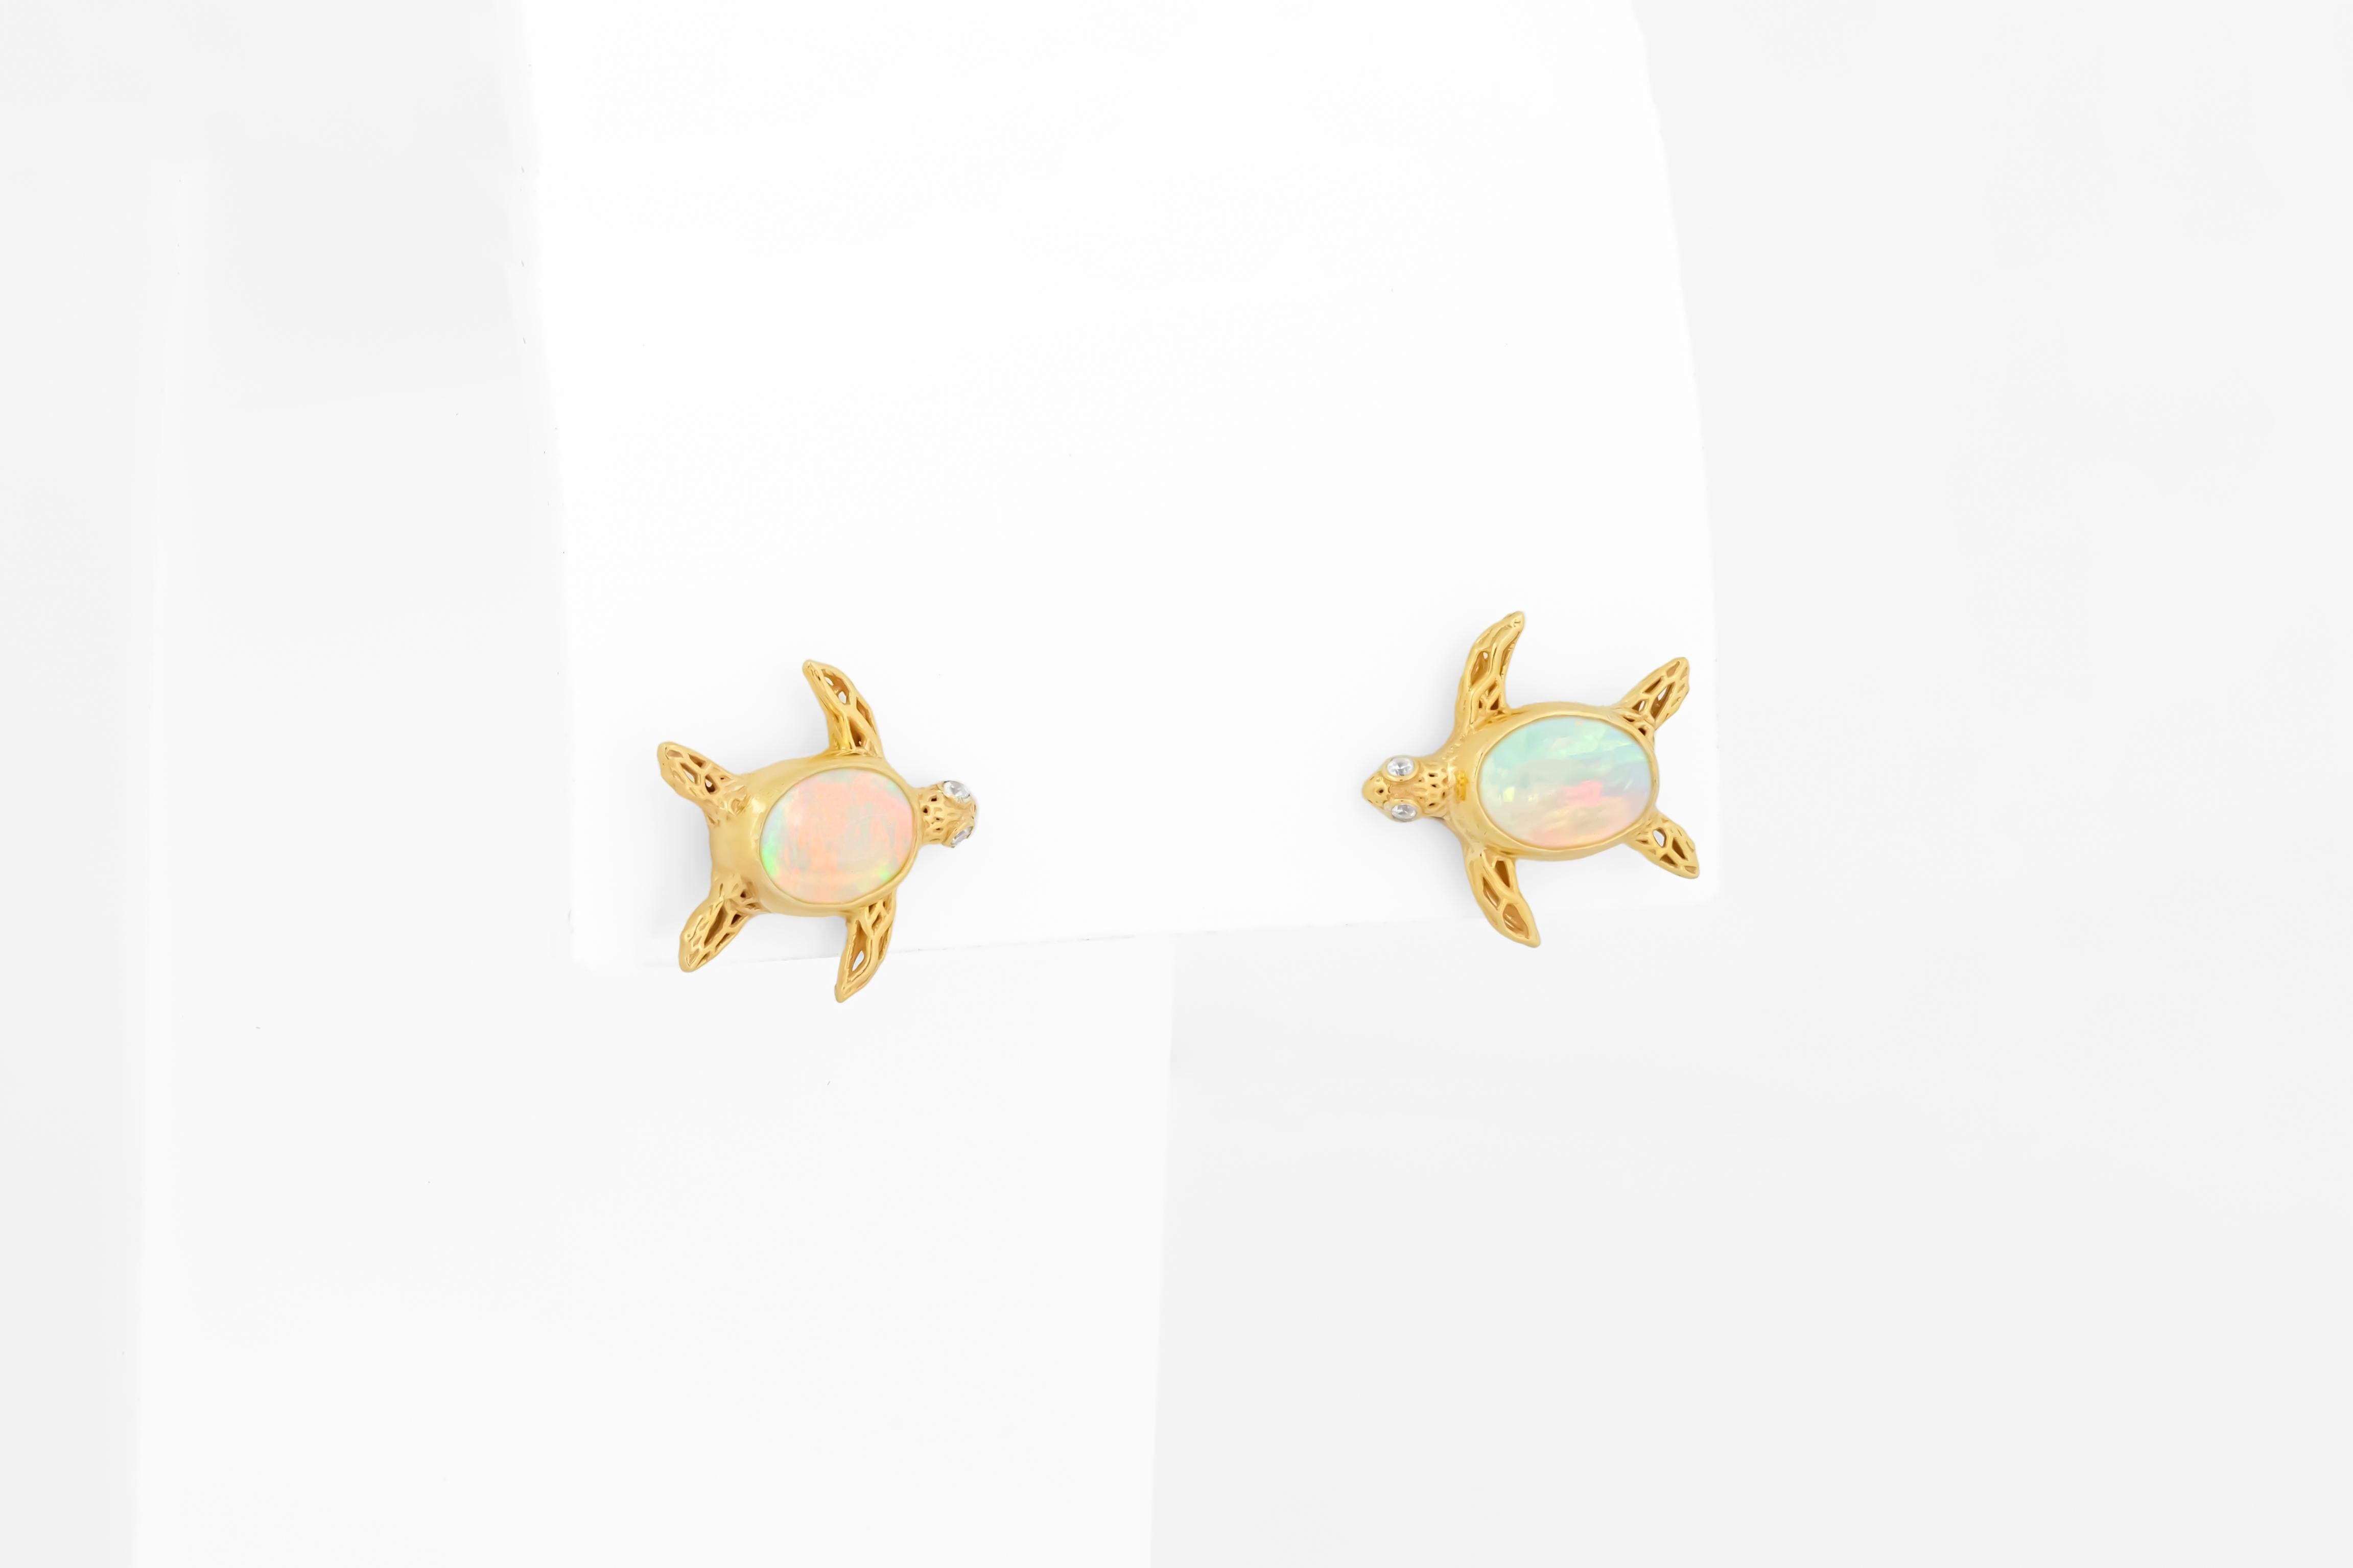 Turtle earrings studs with opals in 14k gold. 1